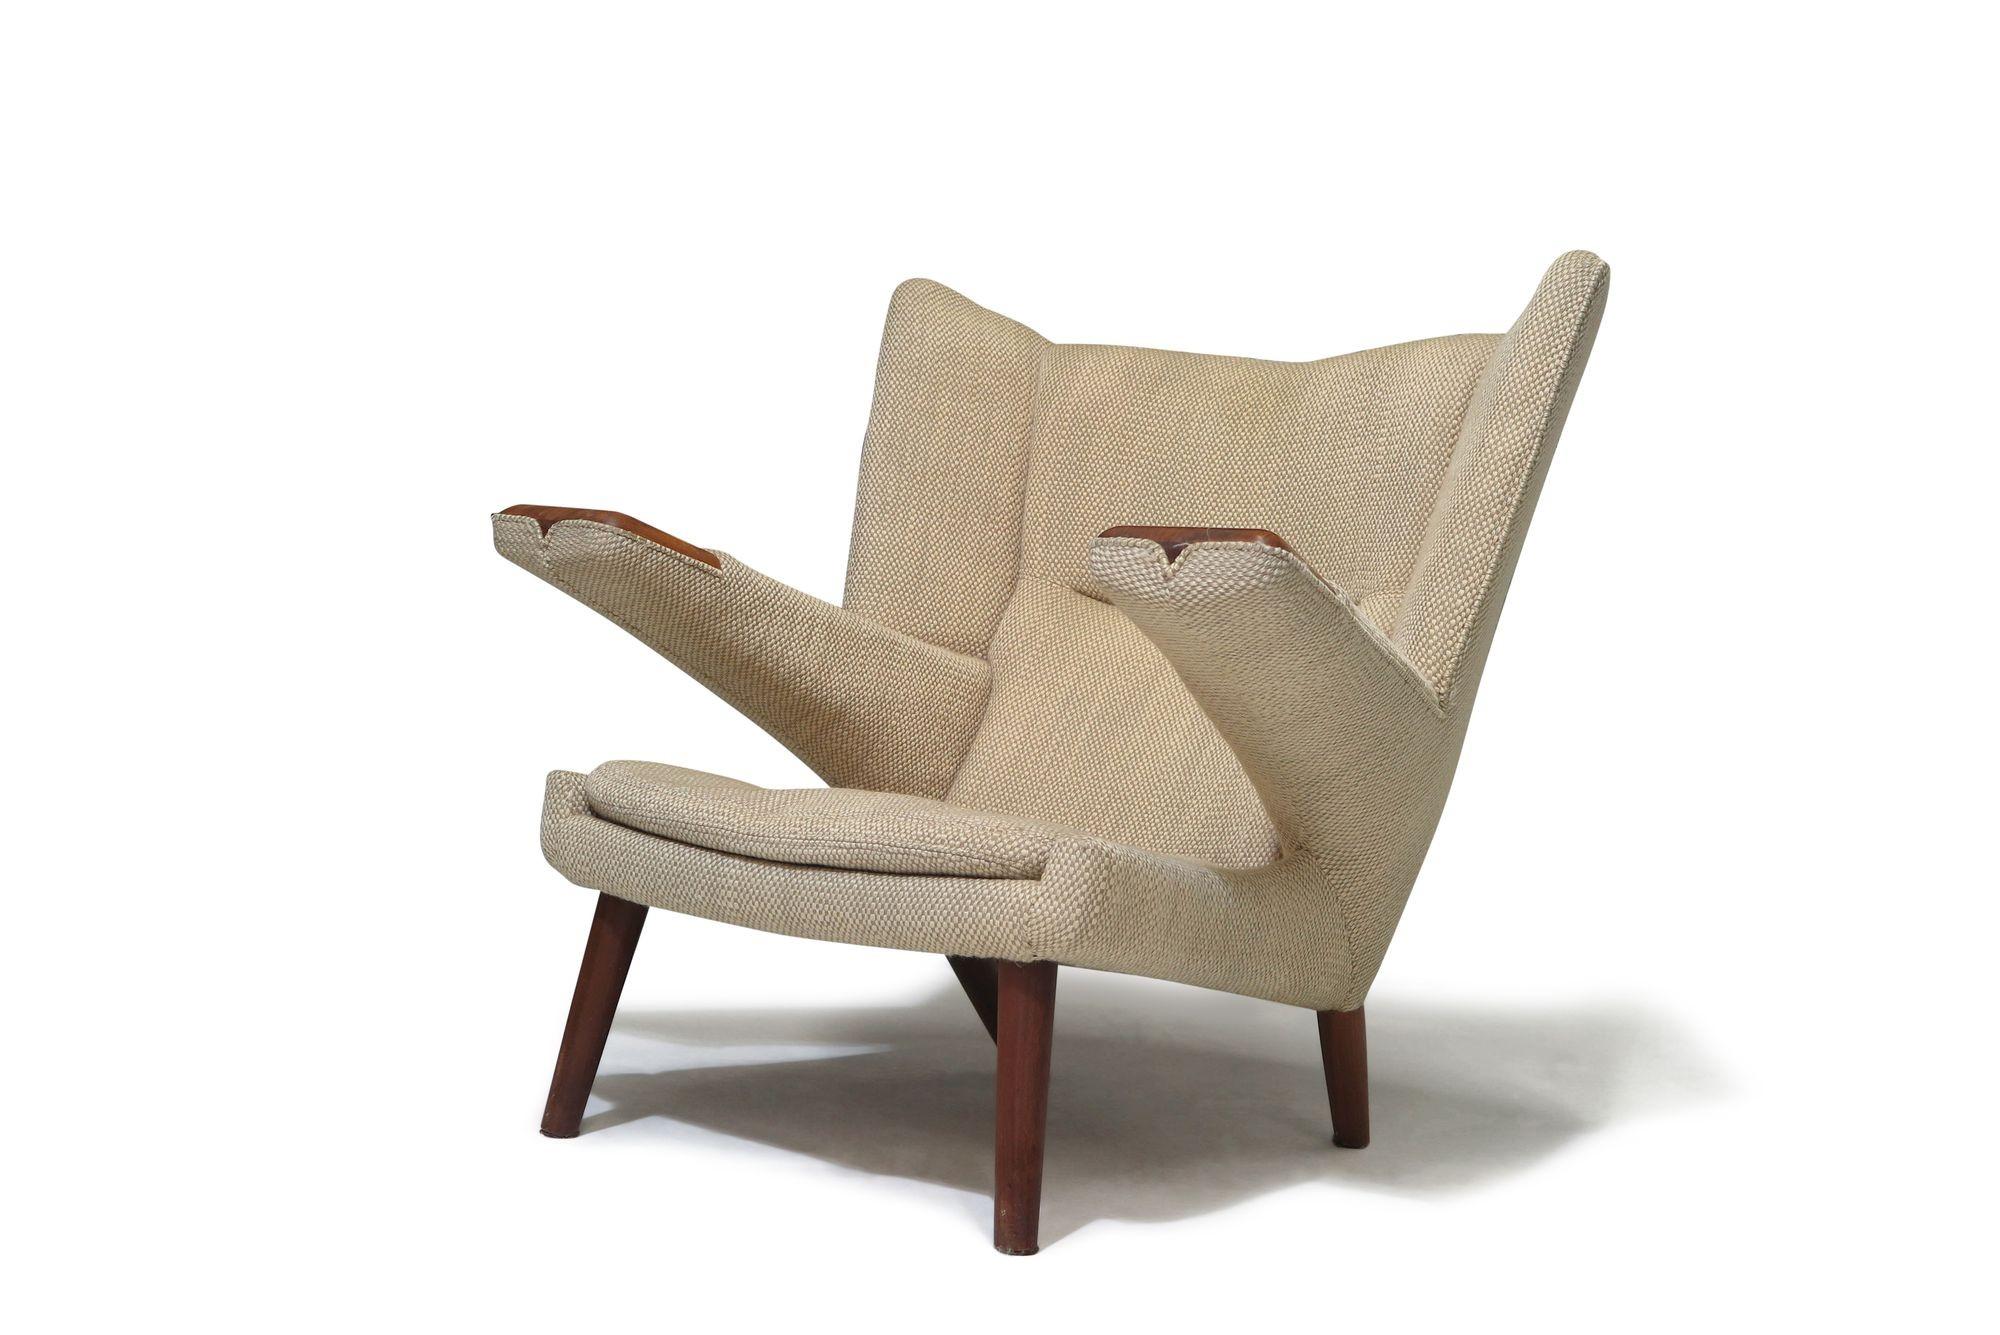 Pair of Hans Wegner AP69 Lounge chairs, a rare, limited production lounge chair designed by Hans Wegner, for A.P.Stolen, 1968-1969.
Hardwood frames with wide teak arm rests. Upholstered in the original Cobblestone fabric.  
Measurements 
W 36.75'' x